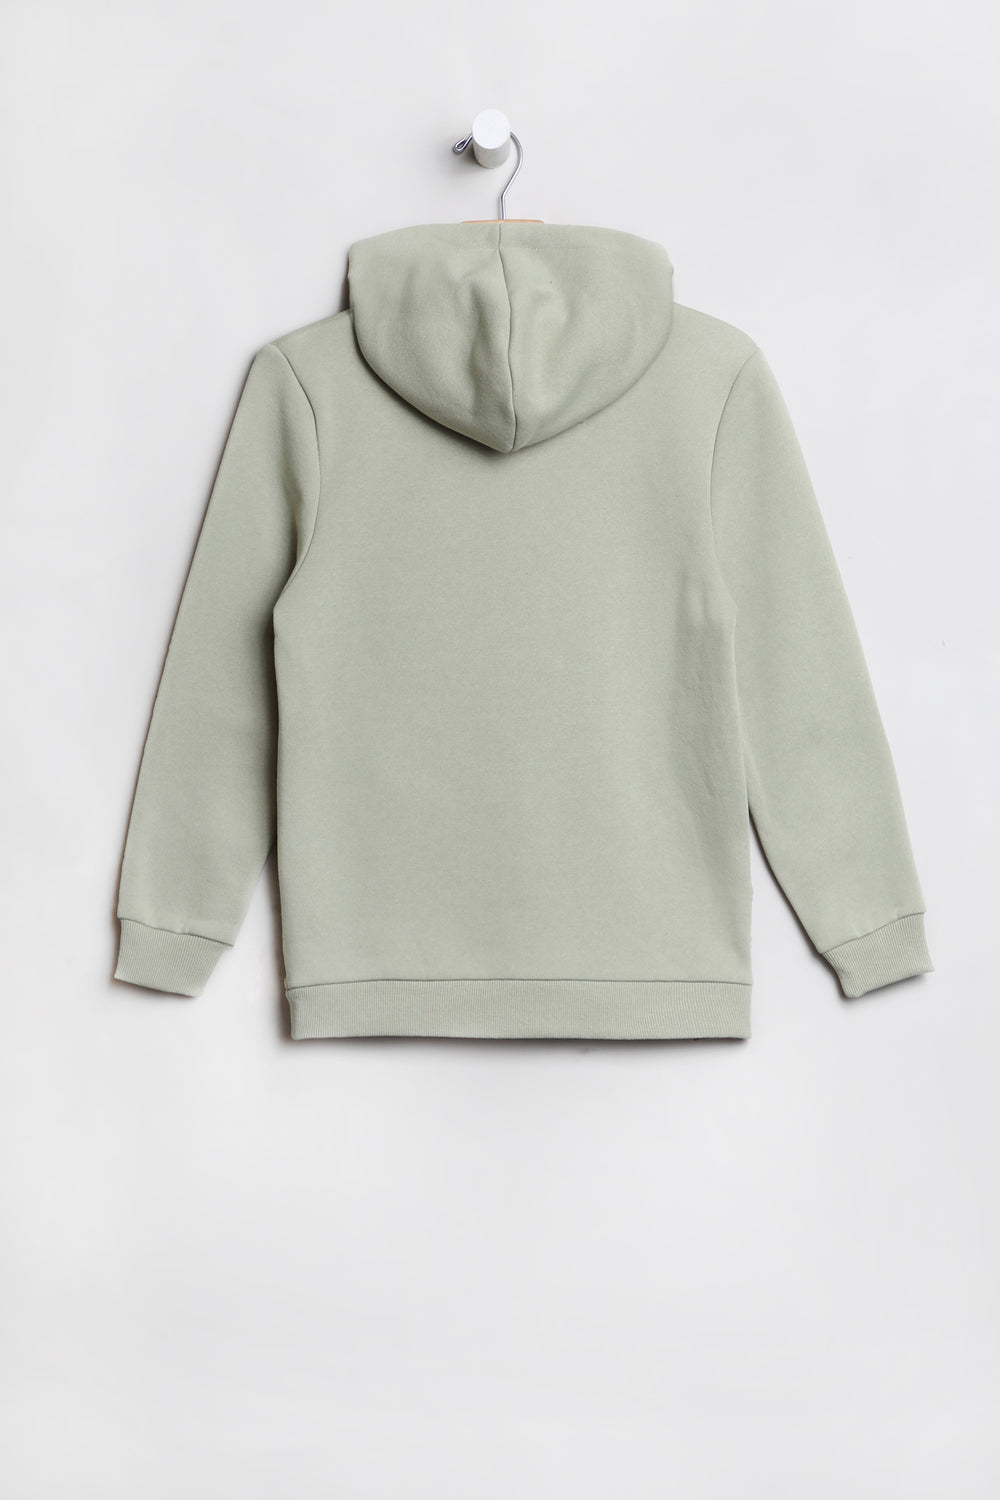 Zoo York Youth Solid Colour Hoodie Zoo York Youth Solid Colour Hoodie